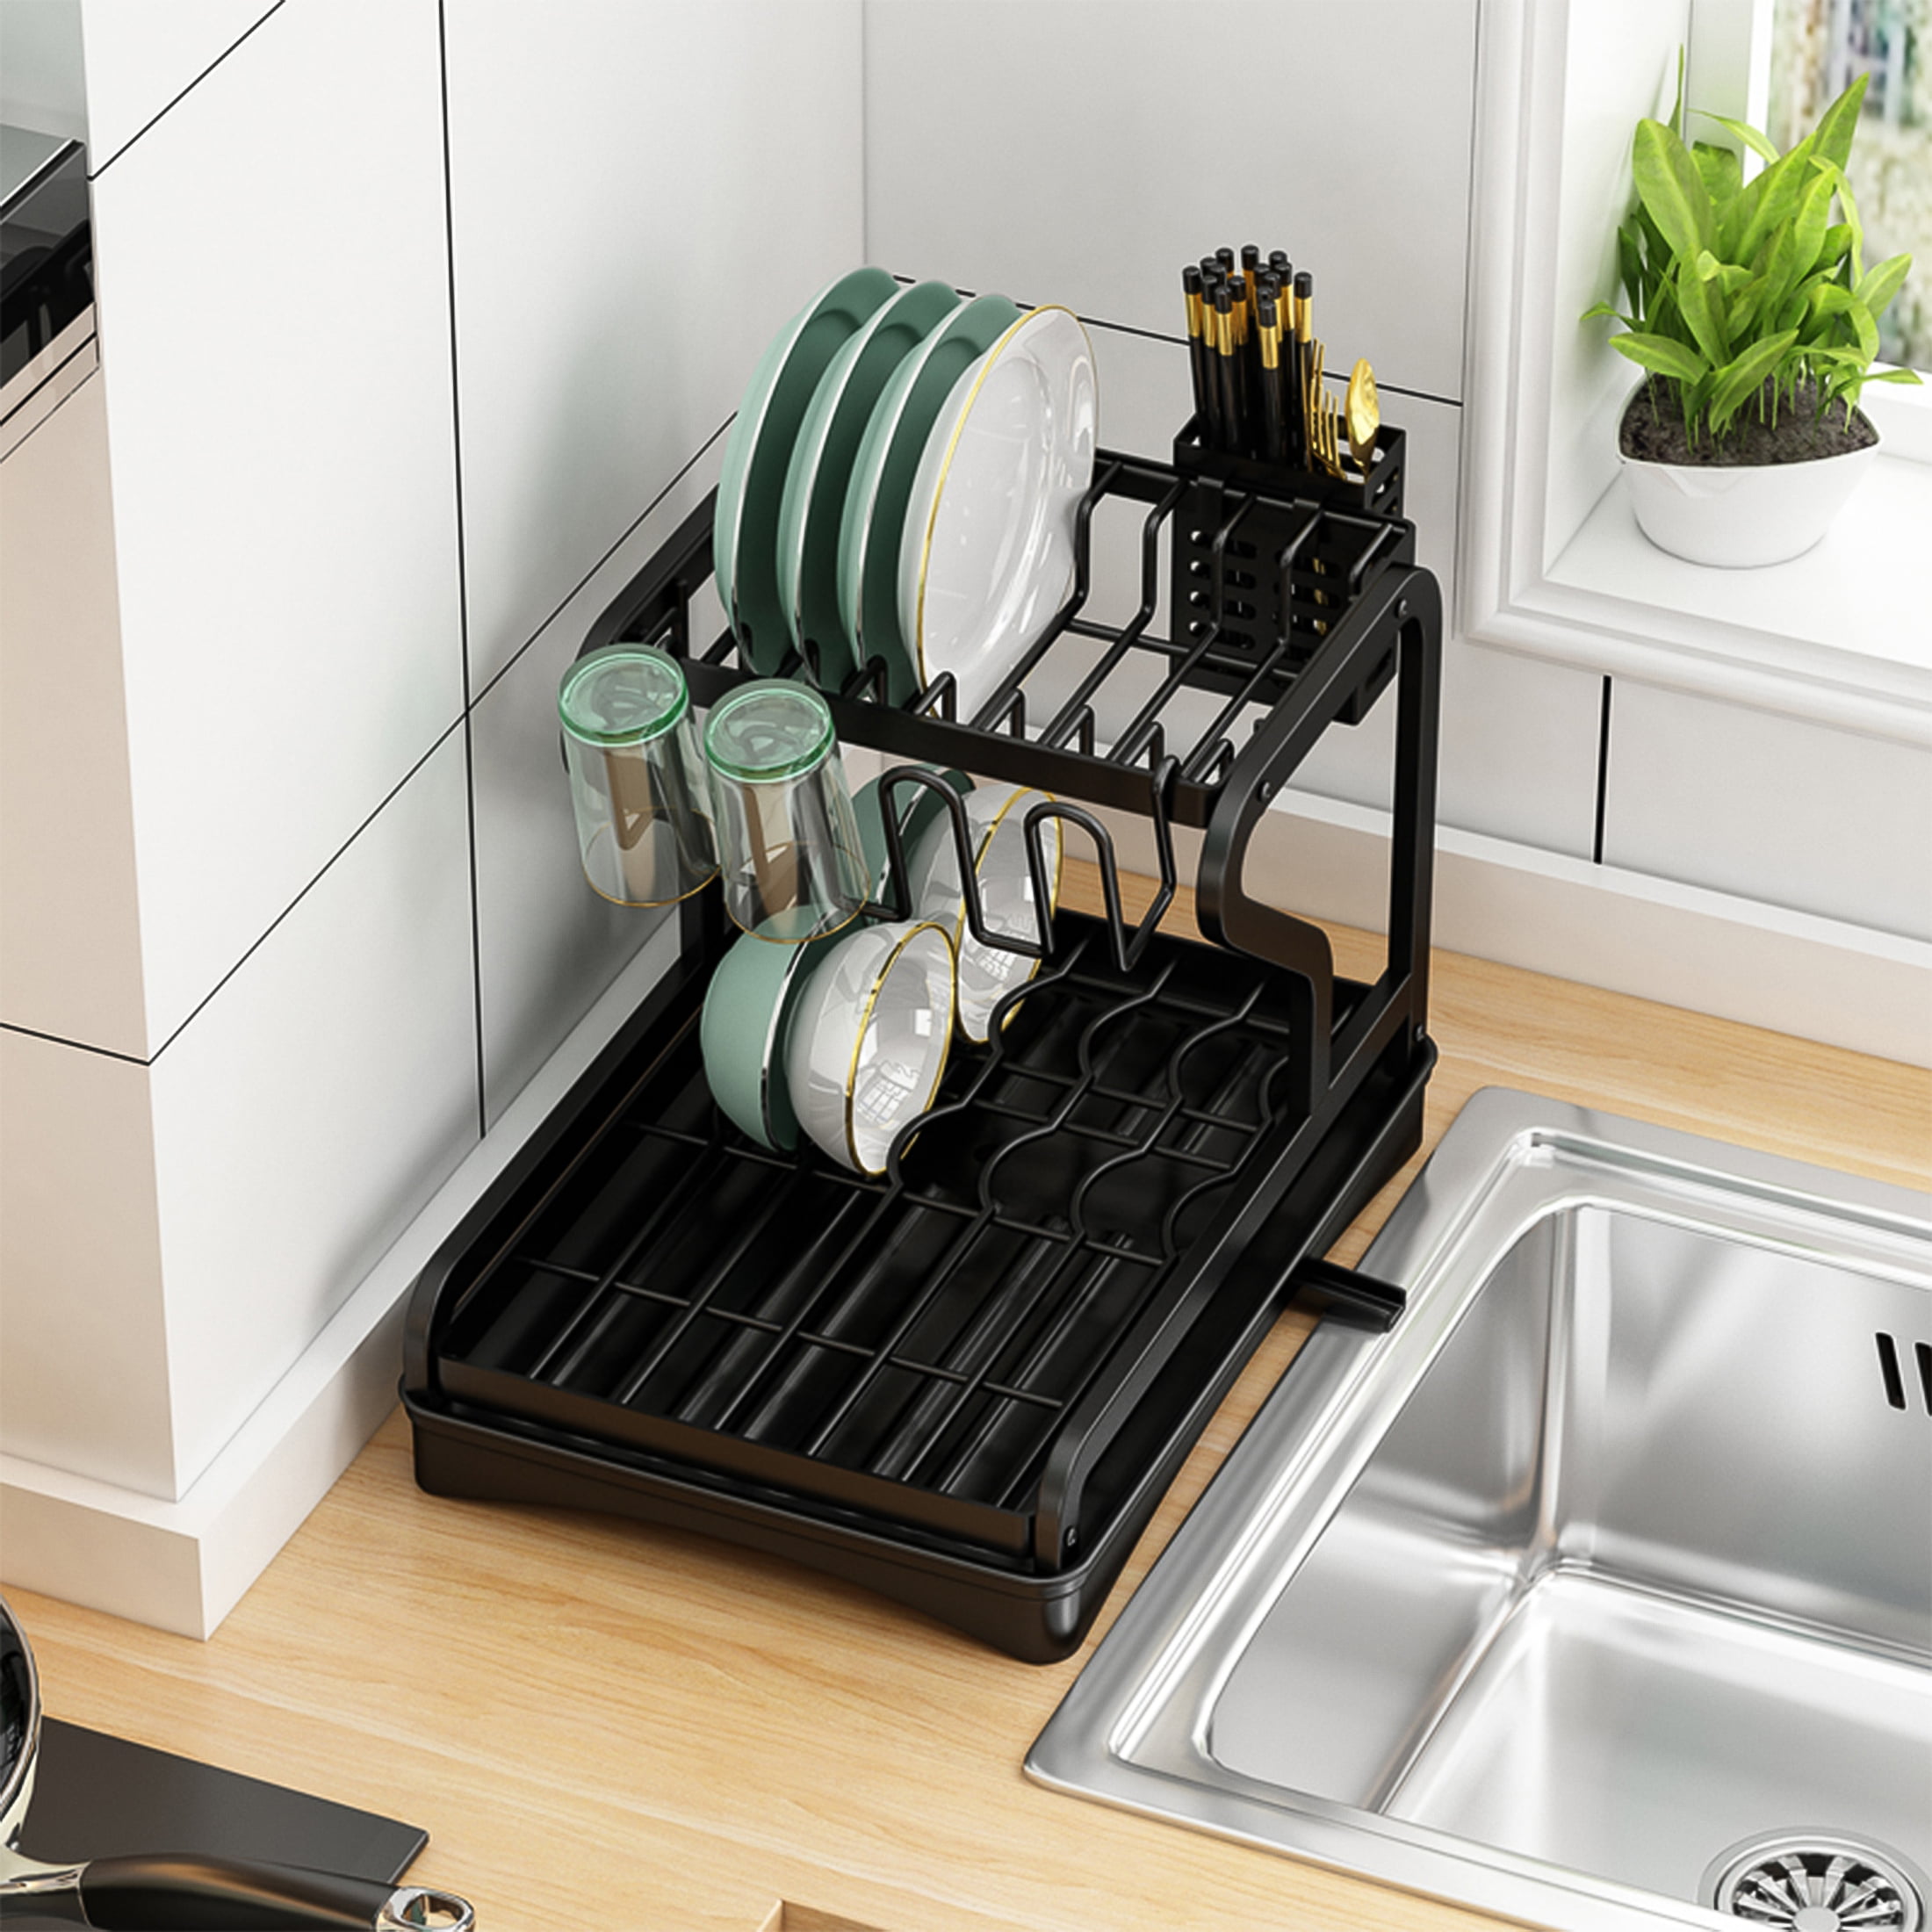 Kitchen Details Acacia Wood Dish Rack with Draining Tray in Black  15182-BLACK - The Home Depot